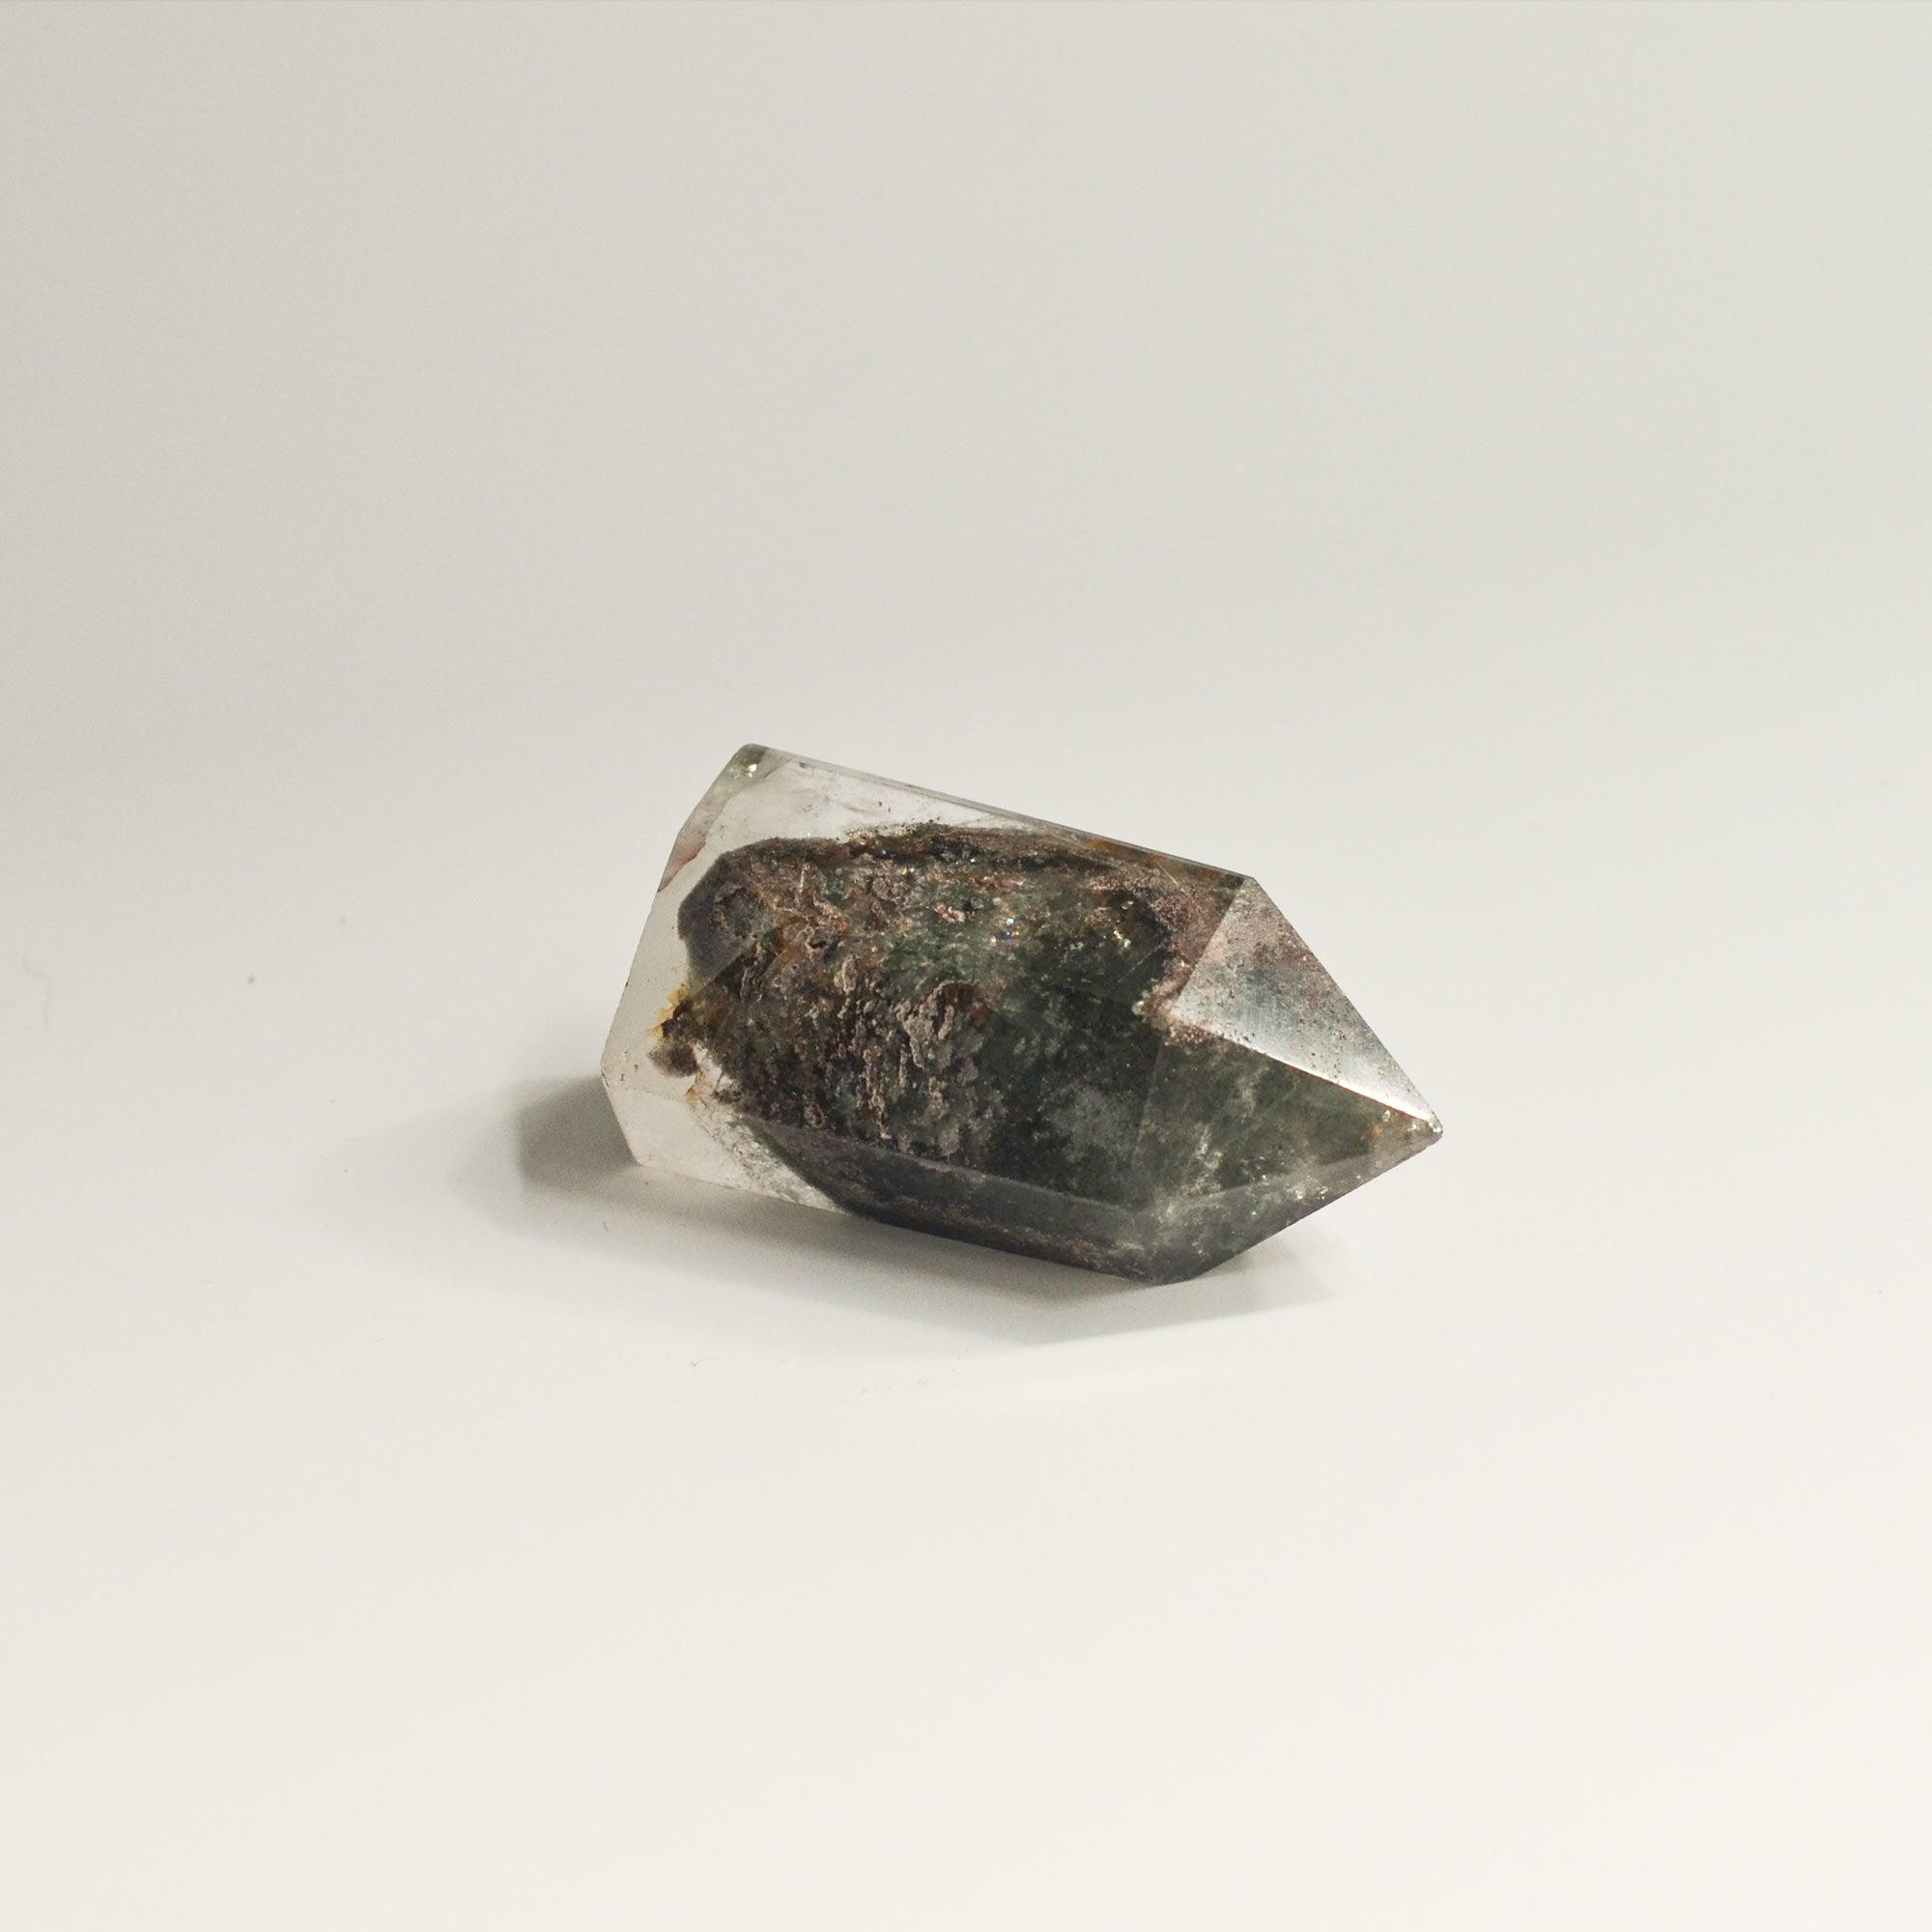 Phantom quartz with nature inclusions from the top